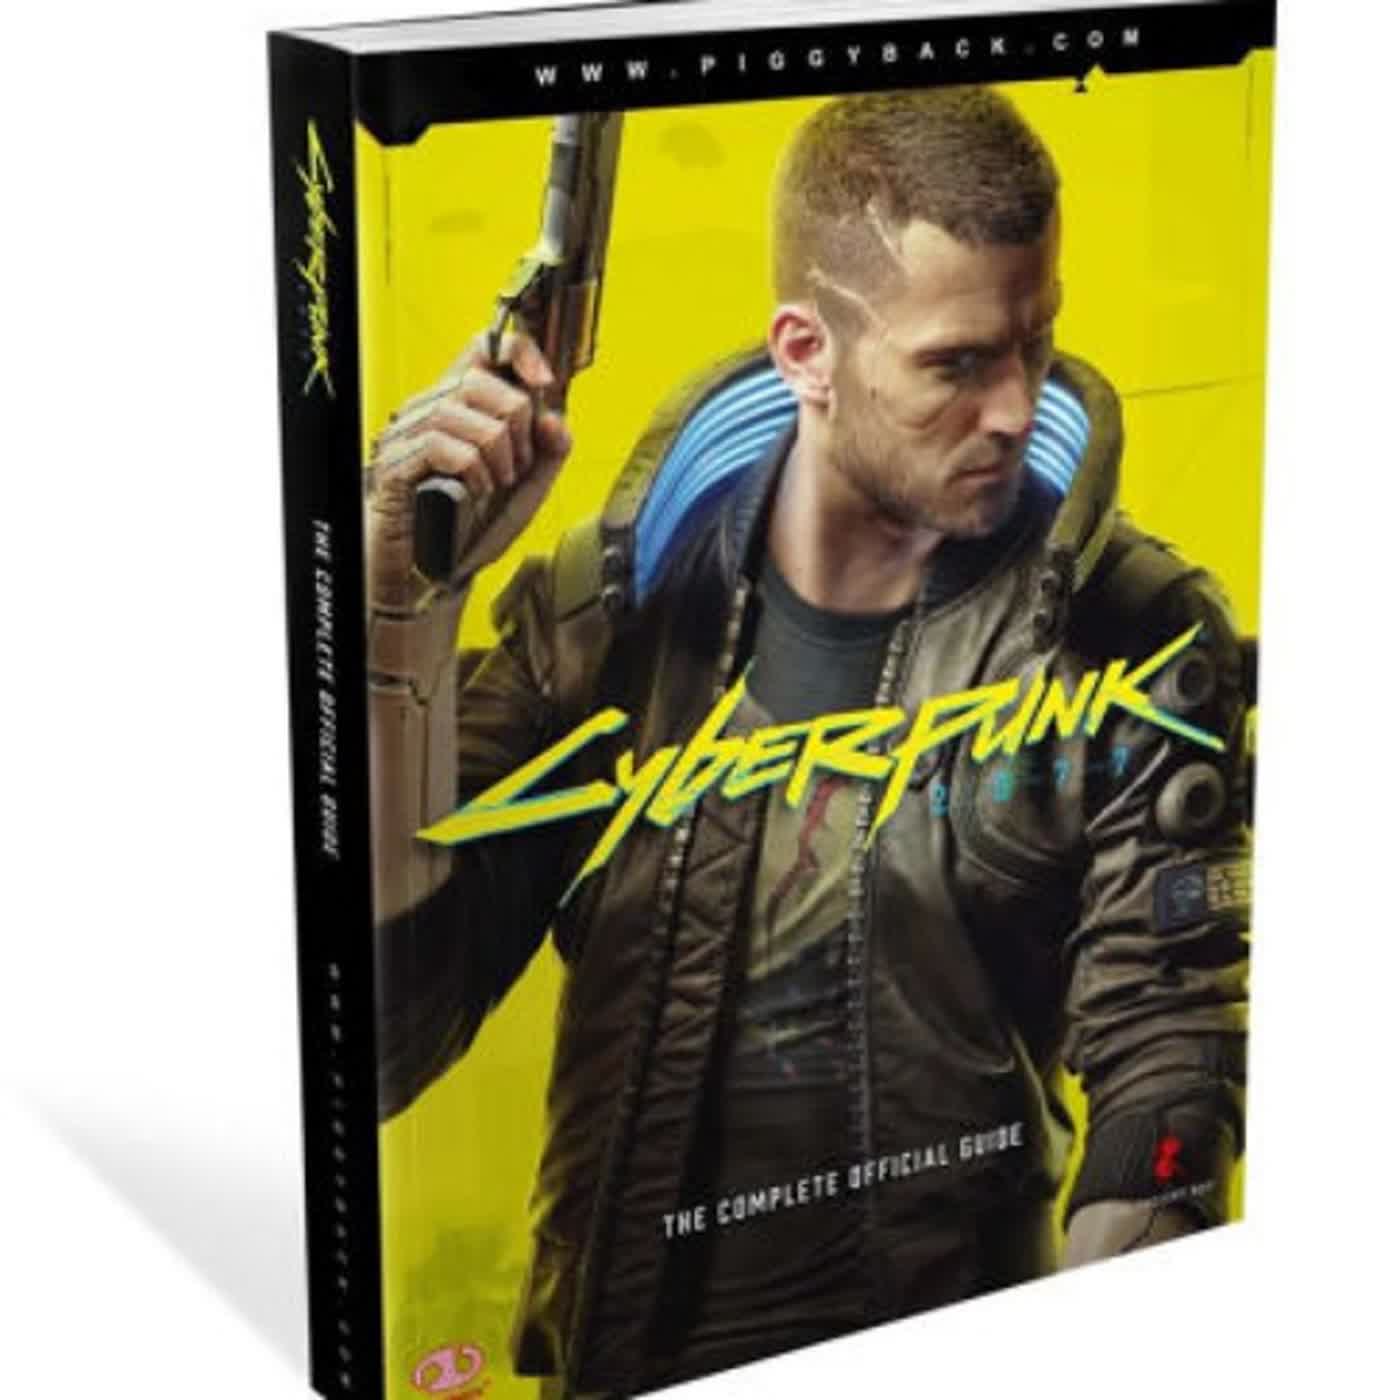 DOWNLOADS Cyberpunk 2077: The Complete Official Guide by Piggyback